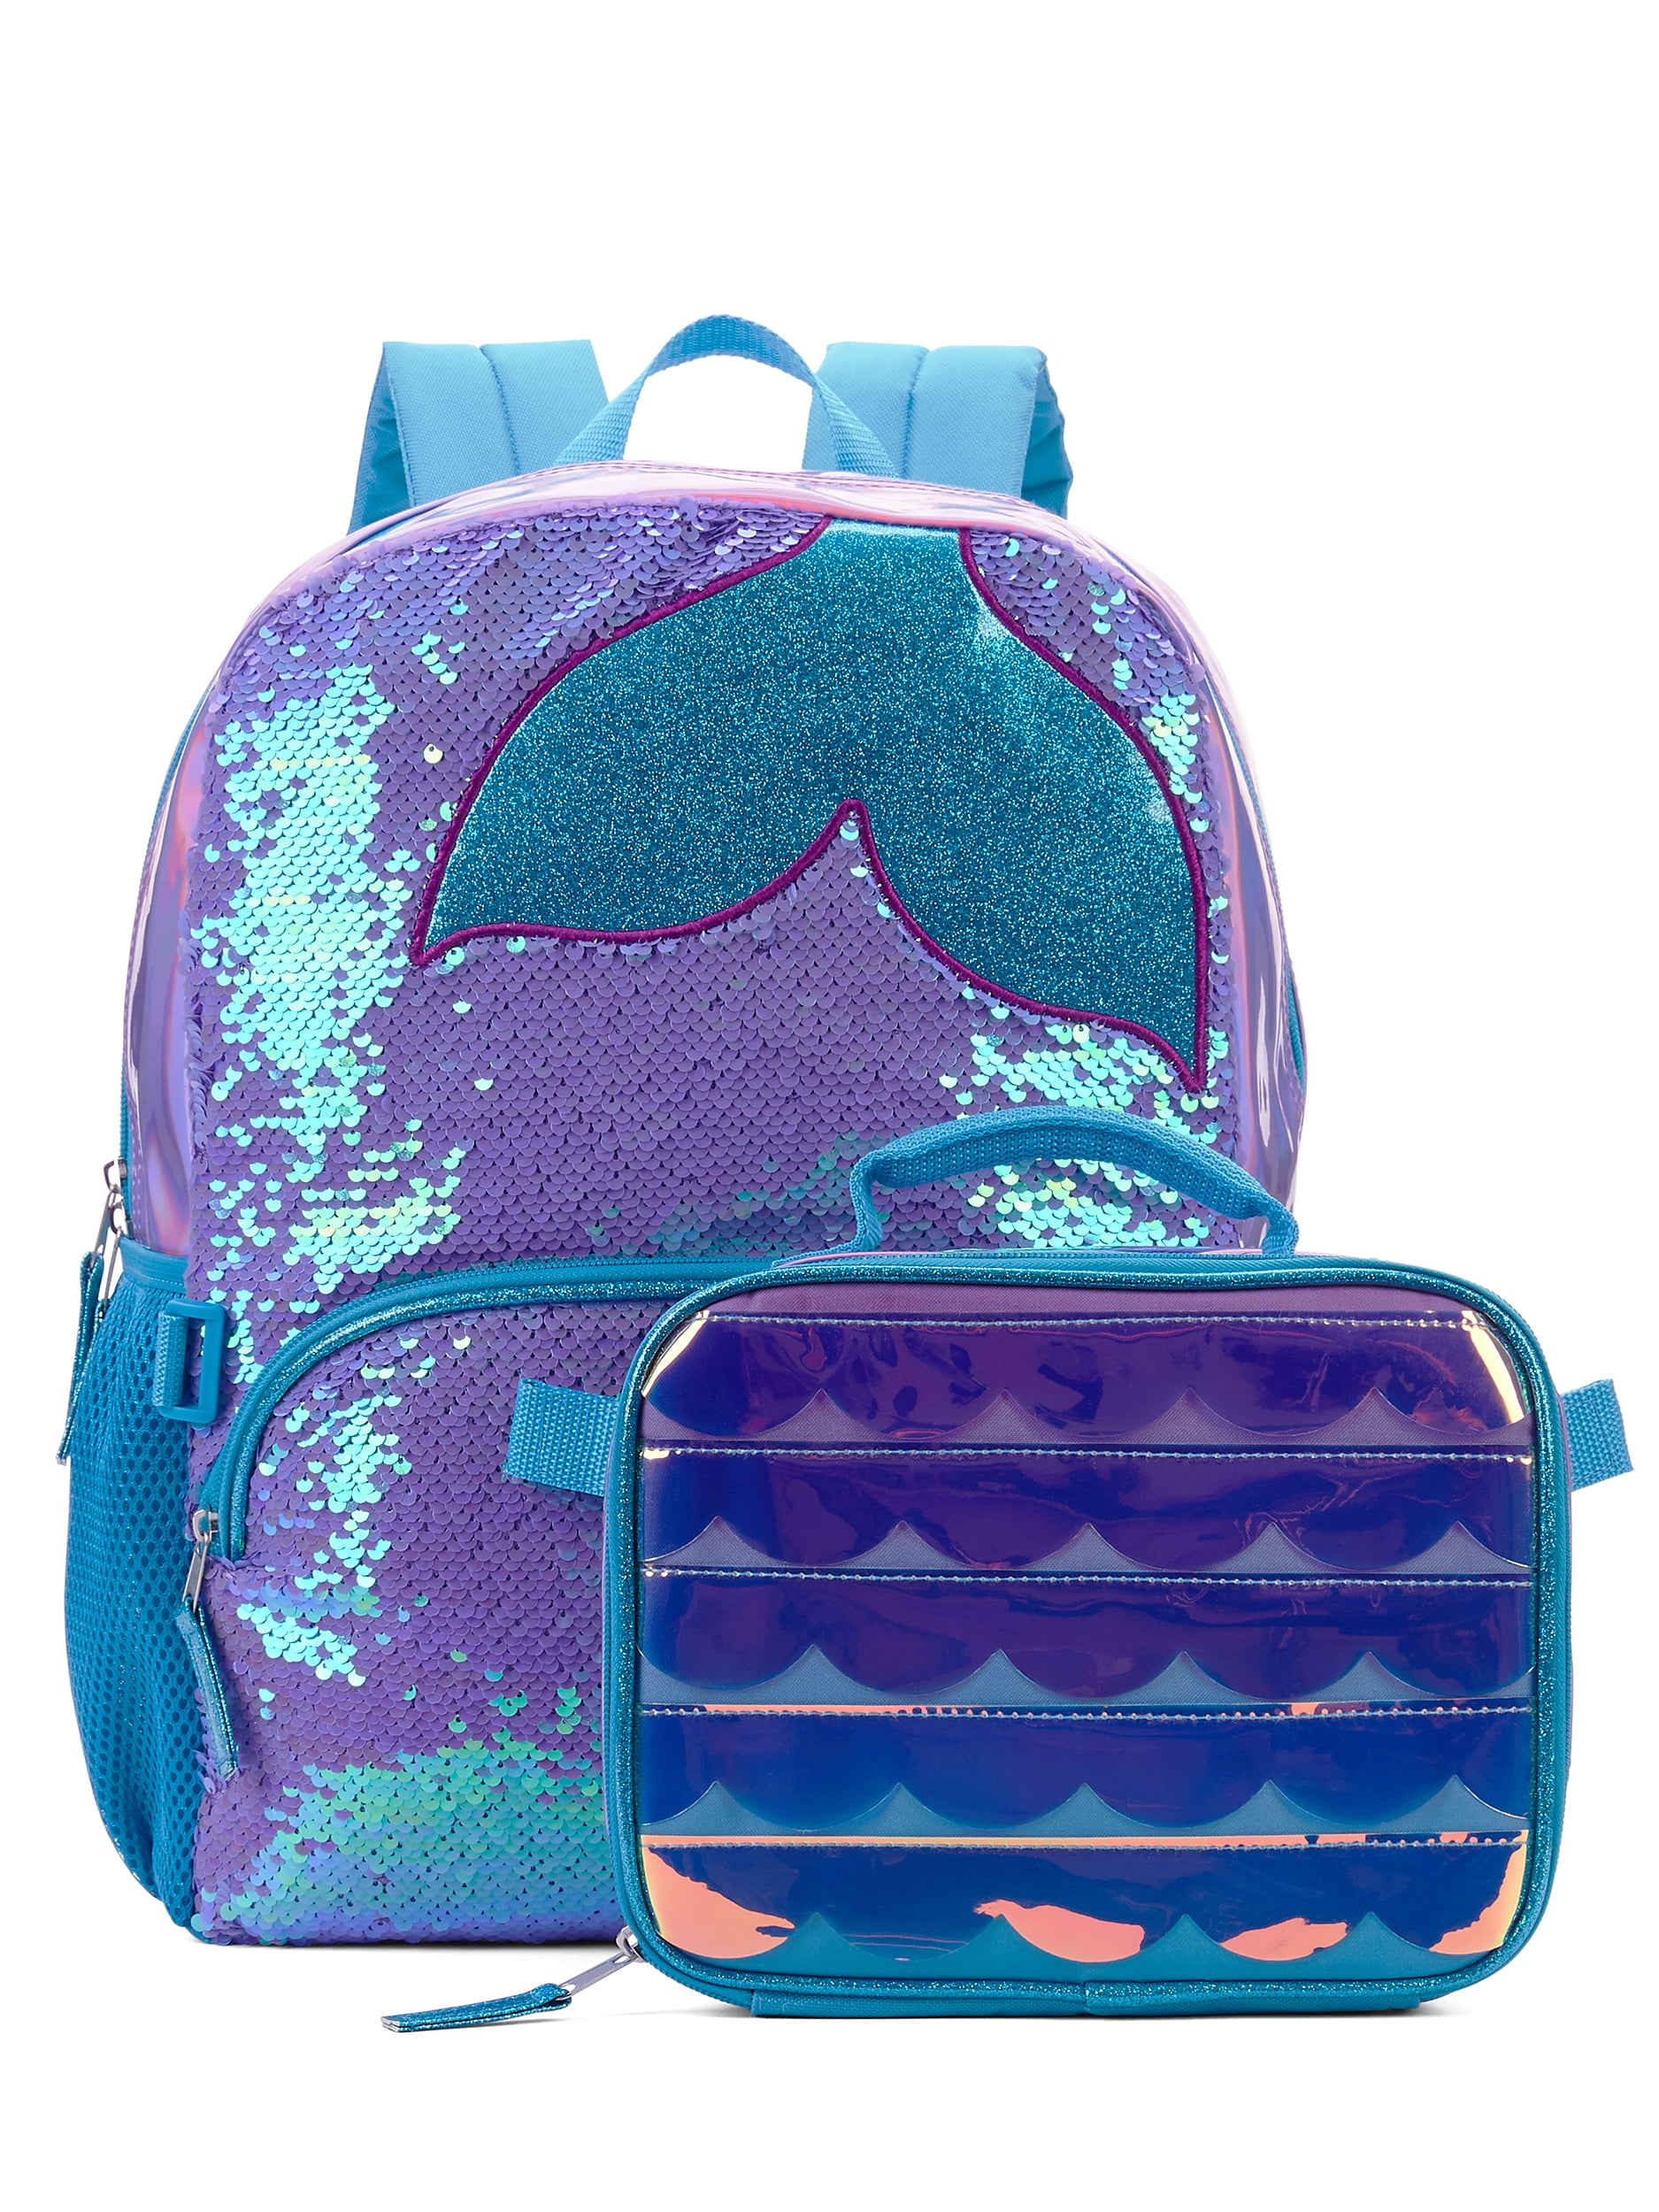 SIWA MARY School Backpack Students Magic Fantasy Mermaid Marine World Animal Lightweight with Lunch Bag for Girls and Boys